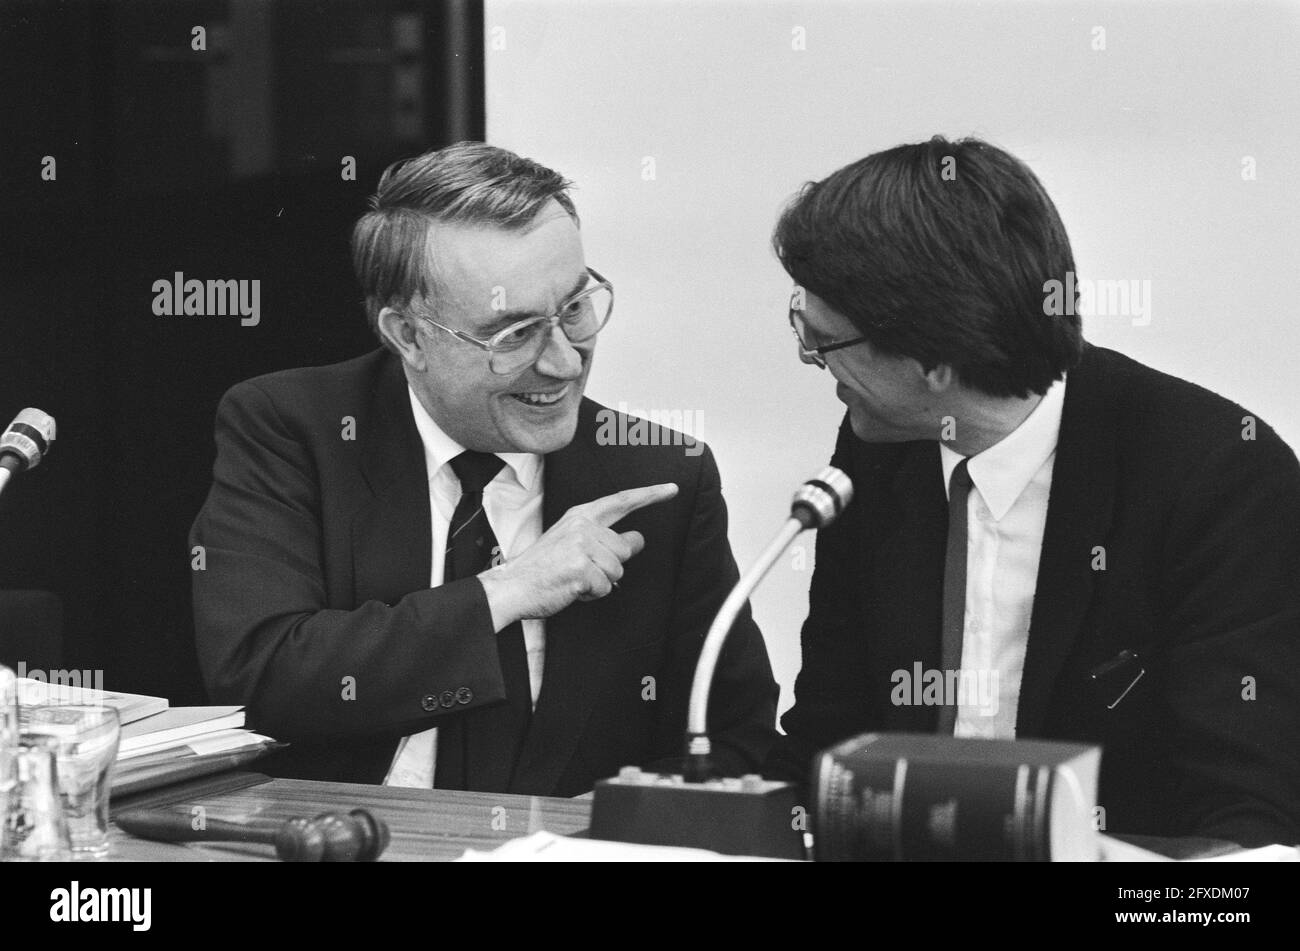 State Secretary King with House Committee ISMO on tax havens; State Secretary Henk Koning and PvdA member Hans Kombrink, September 9, 1985, taxes, committees, finance, politics, state secretaries, The Netherlands, 20th century press agency photo, news to remember, documentary, historic photography 1945-1990, visual stories, human history of the Twentieth Century, capturing moments in time Stock Photo